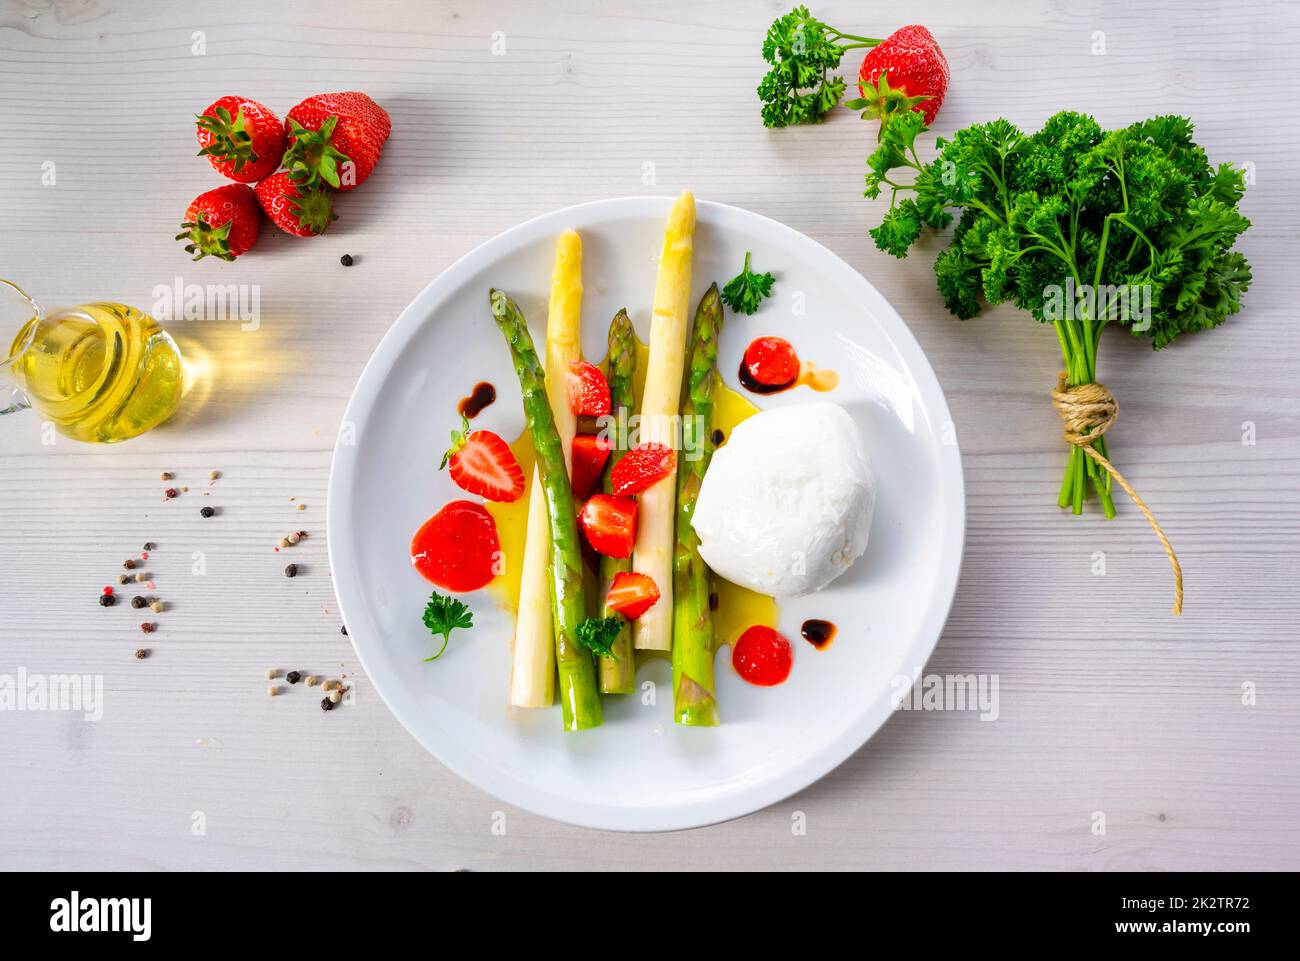 Burrata cheese with asparagus and strawberries Stock Photo